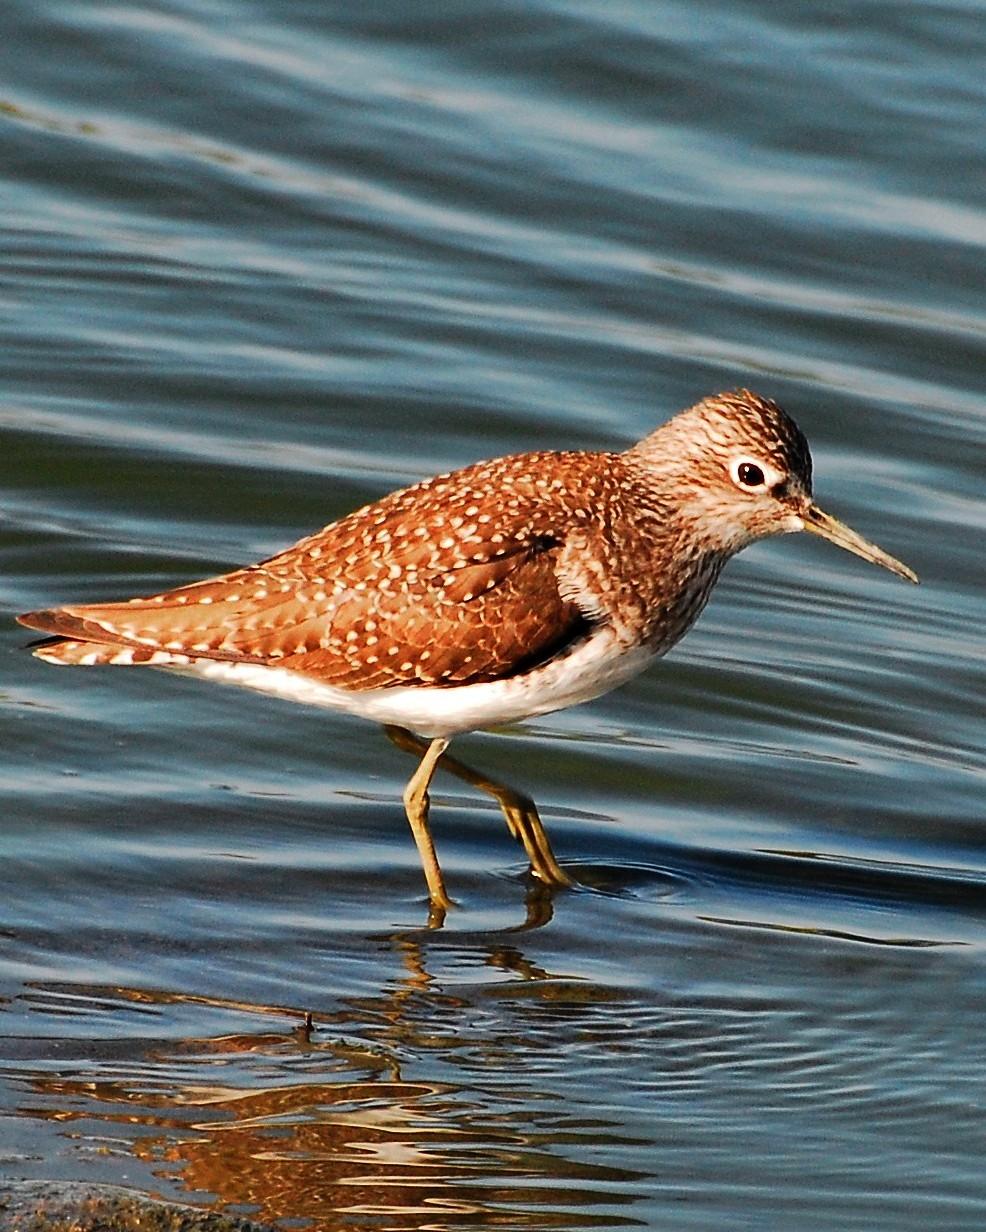 Solitary Sandpiper Photo by David Hollie